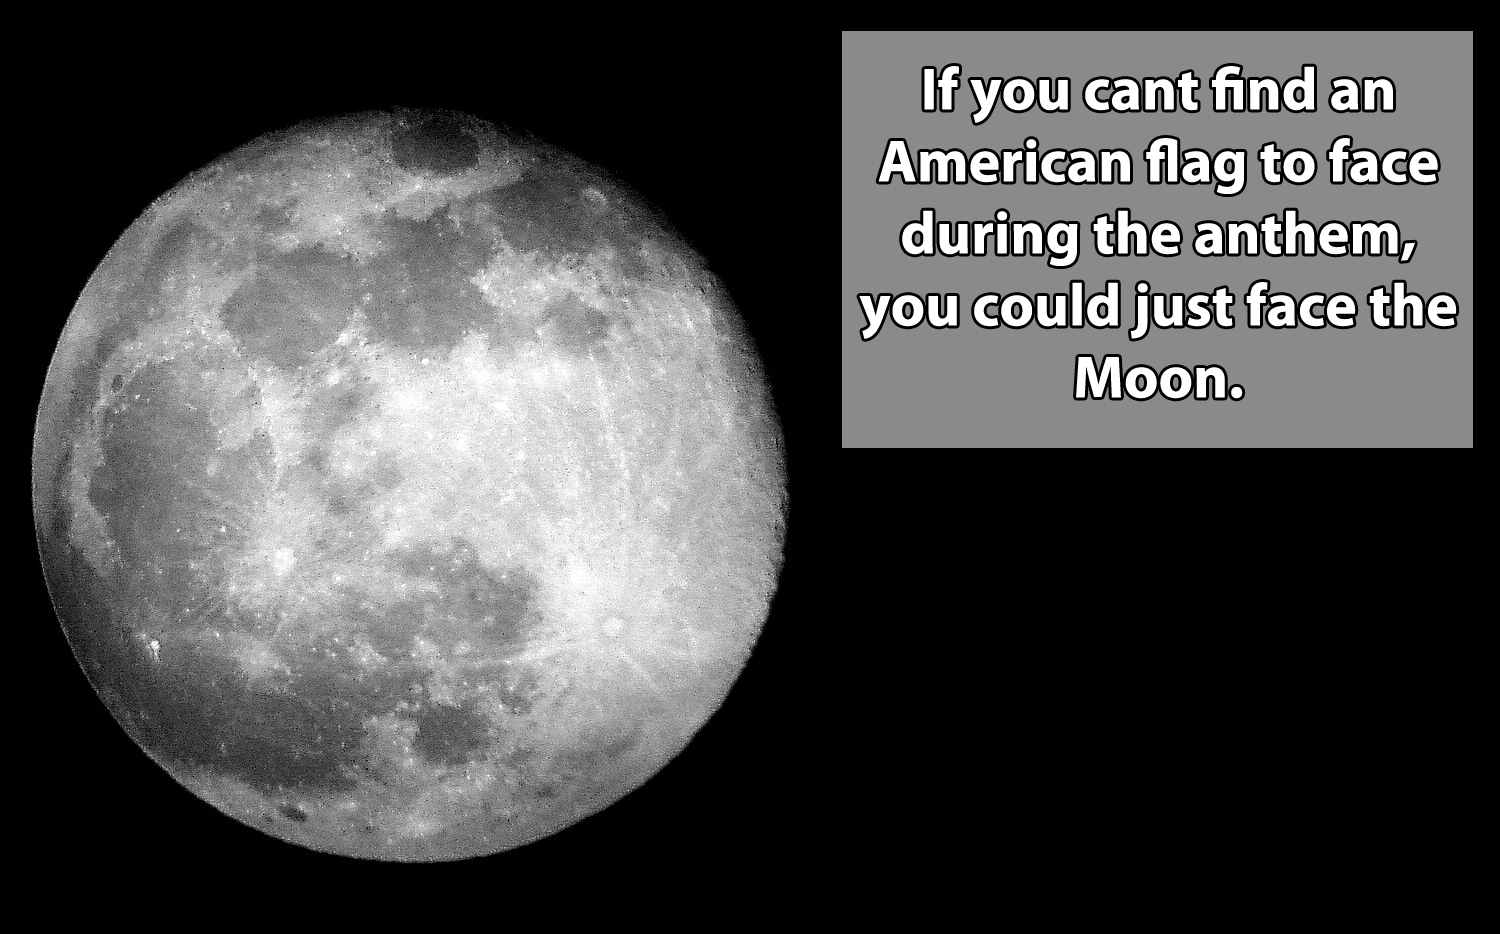 earths moon - If you cant find an American flag to face during the anthem, you could just face the Moon.